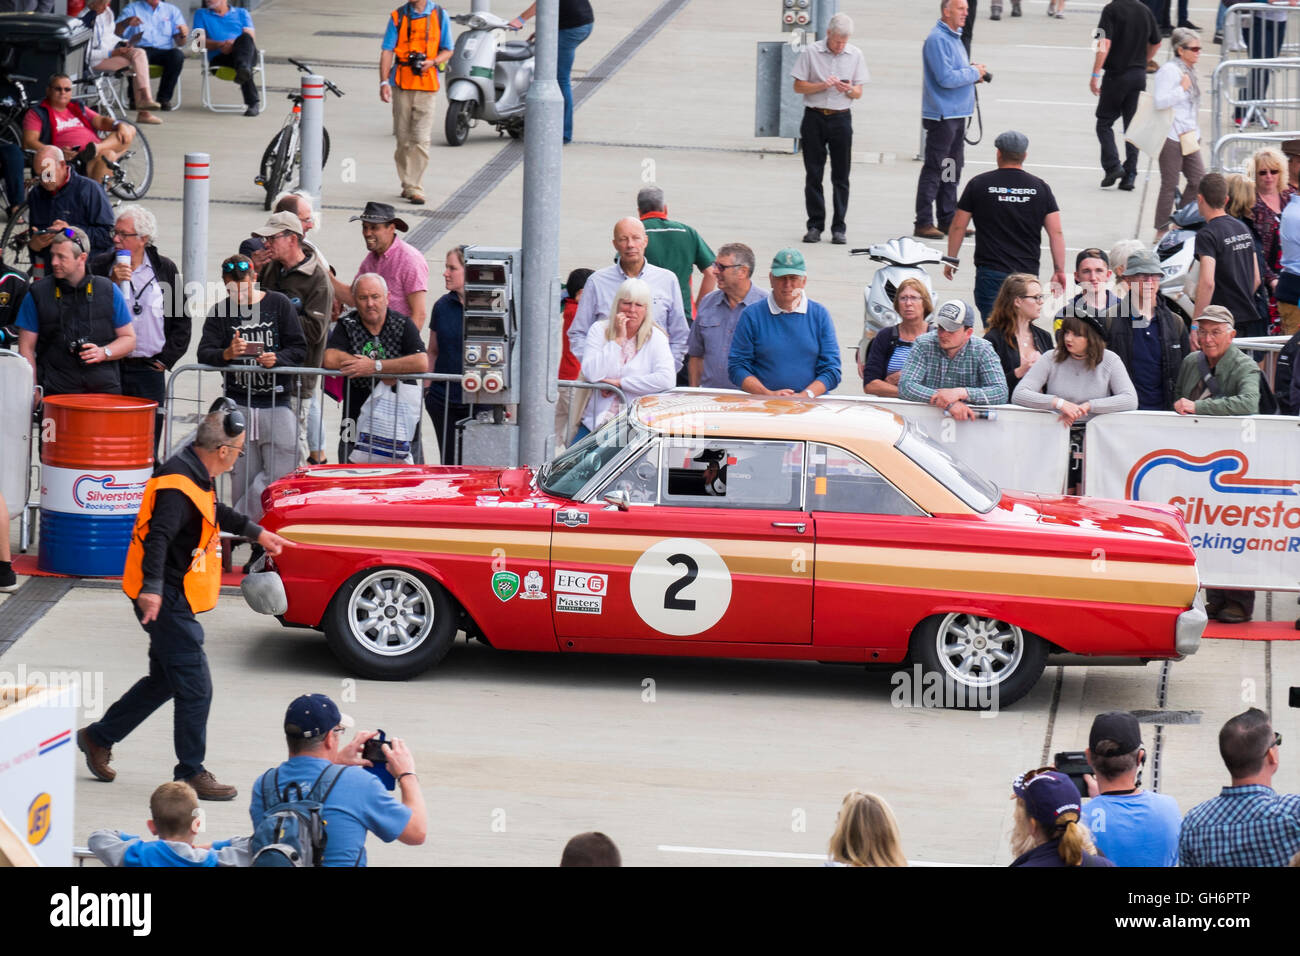 Leo Voyazides, Ford Falcon, Pre-66 große Engined Touring Cars, 2016 Silverstone Classic Event, UK Stockfoto